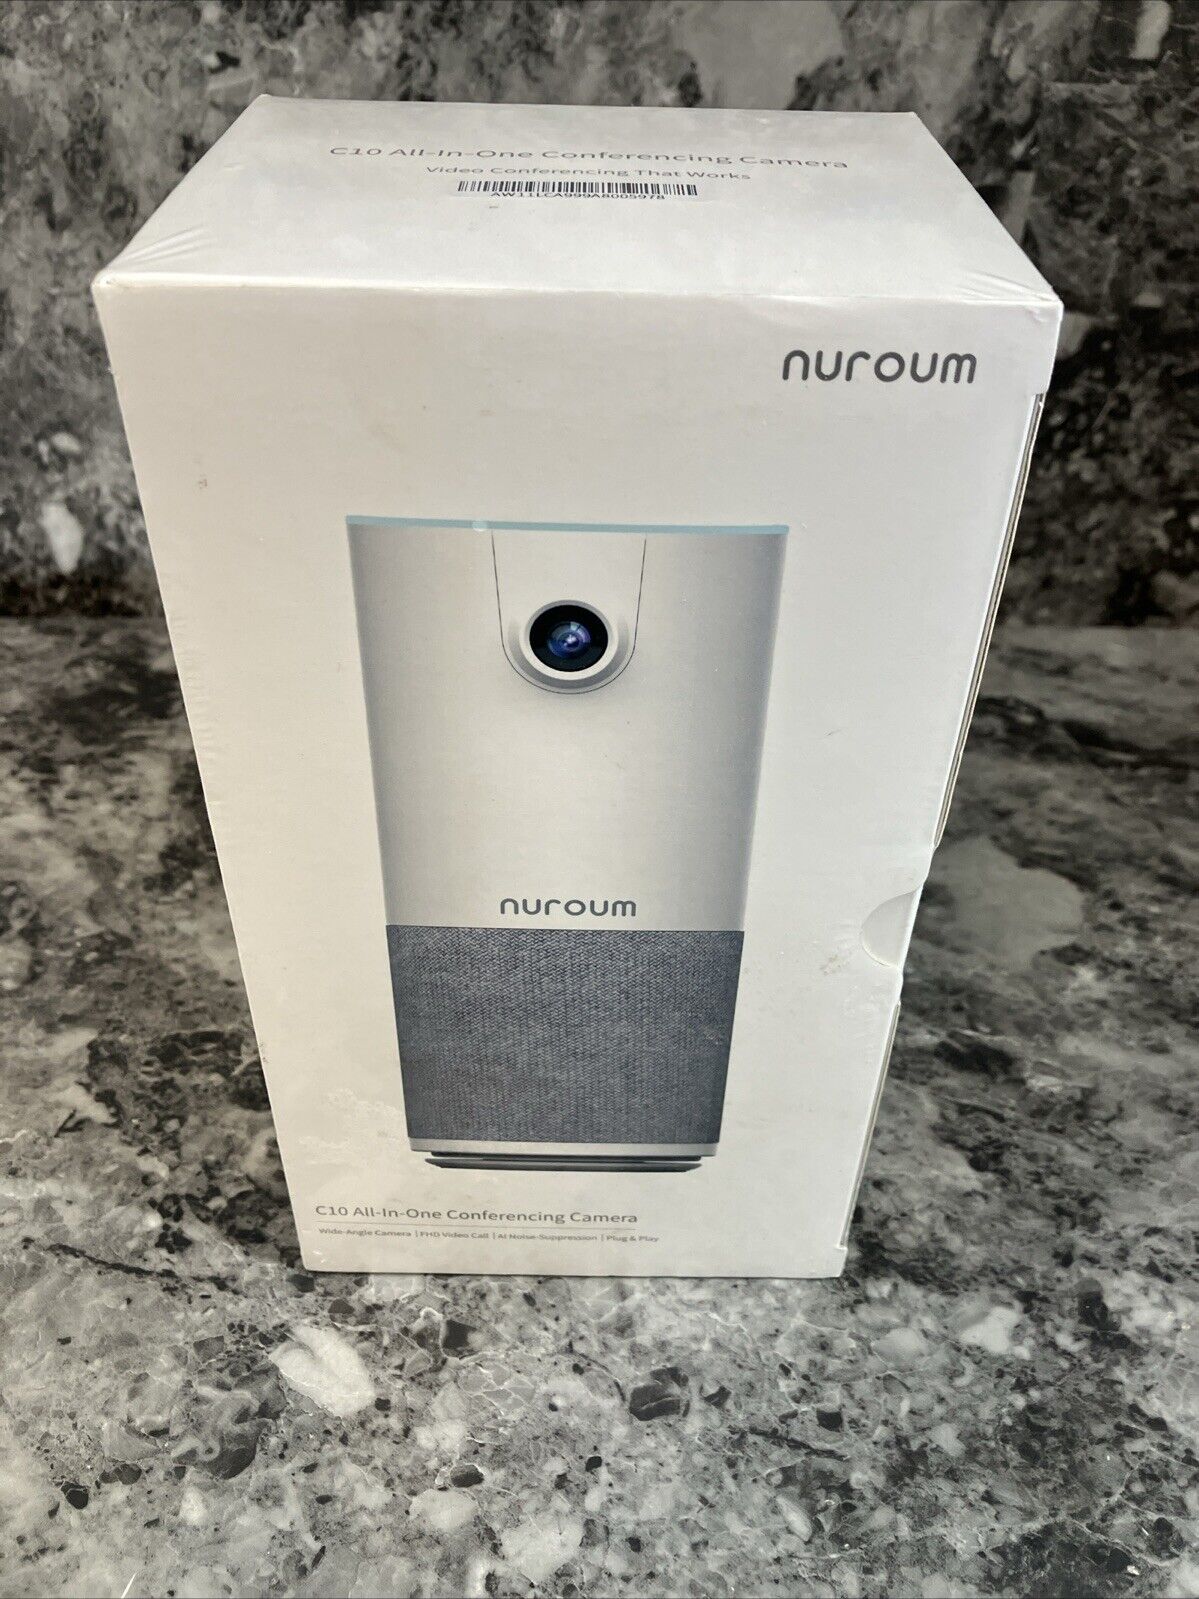 NEW Nuroum C10 All-In-One Conferencing Camera AW-C10 Portable Webcam W/ Speaker